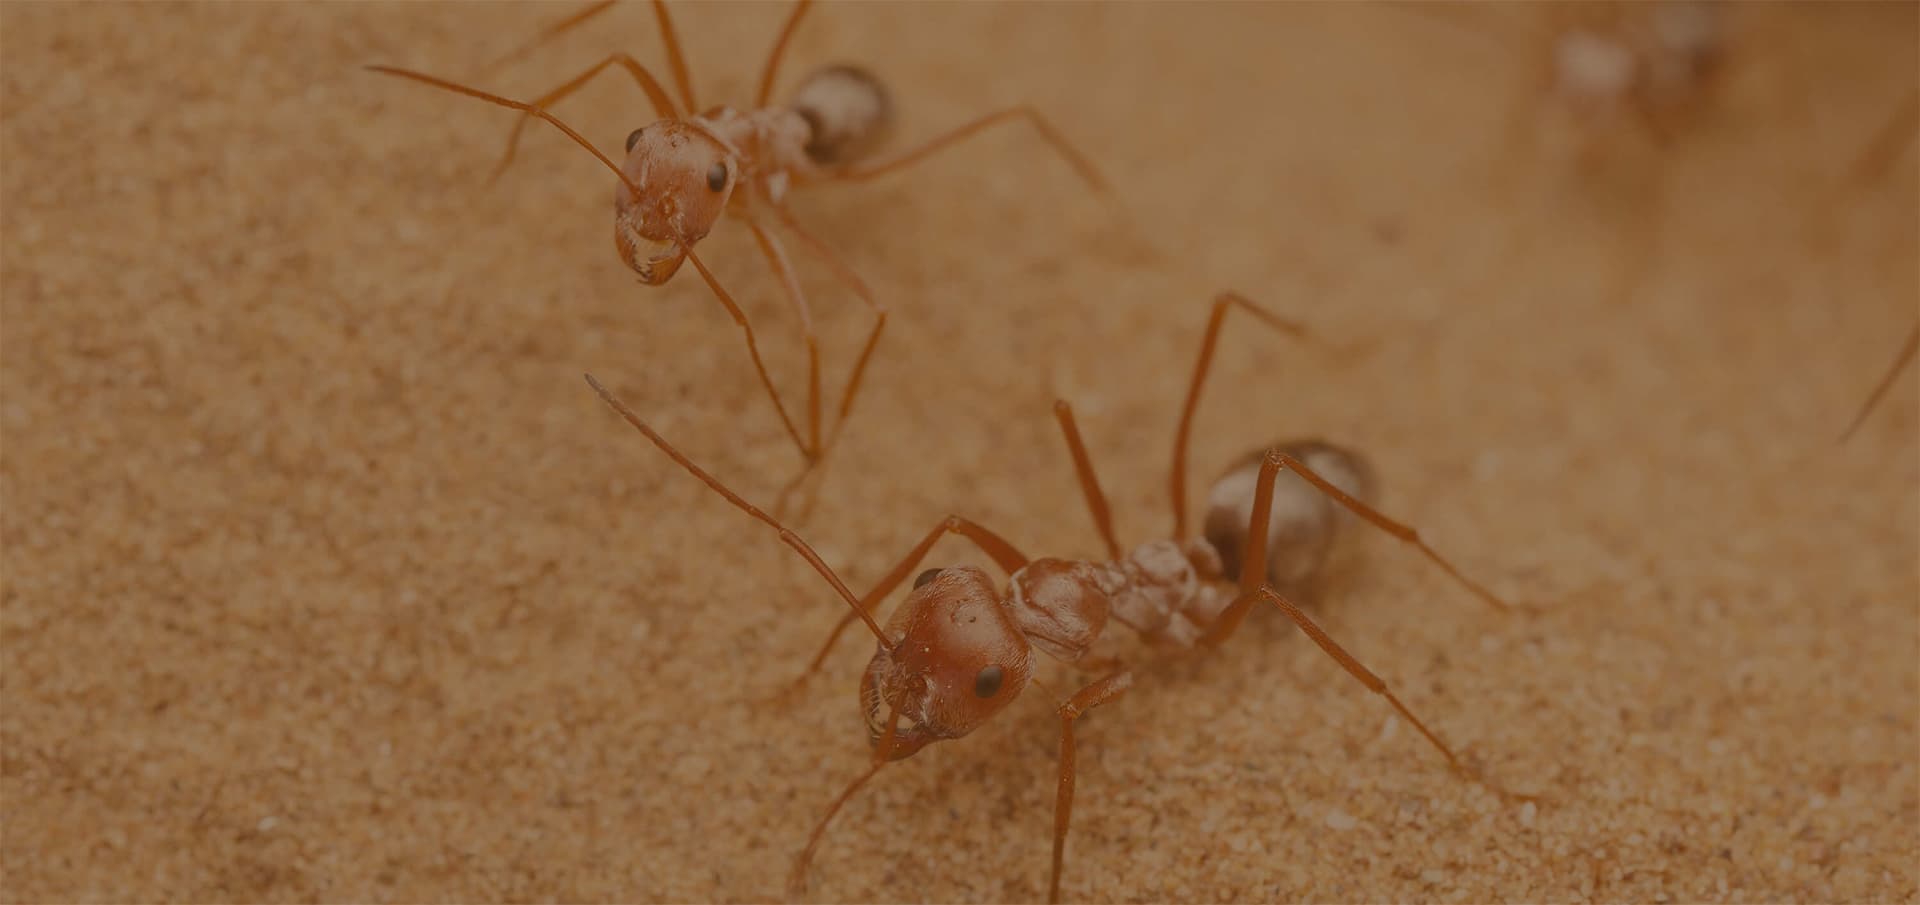 Are you sharing your house with ants?